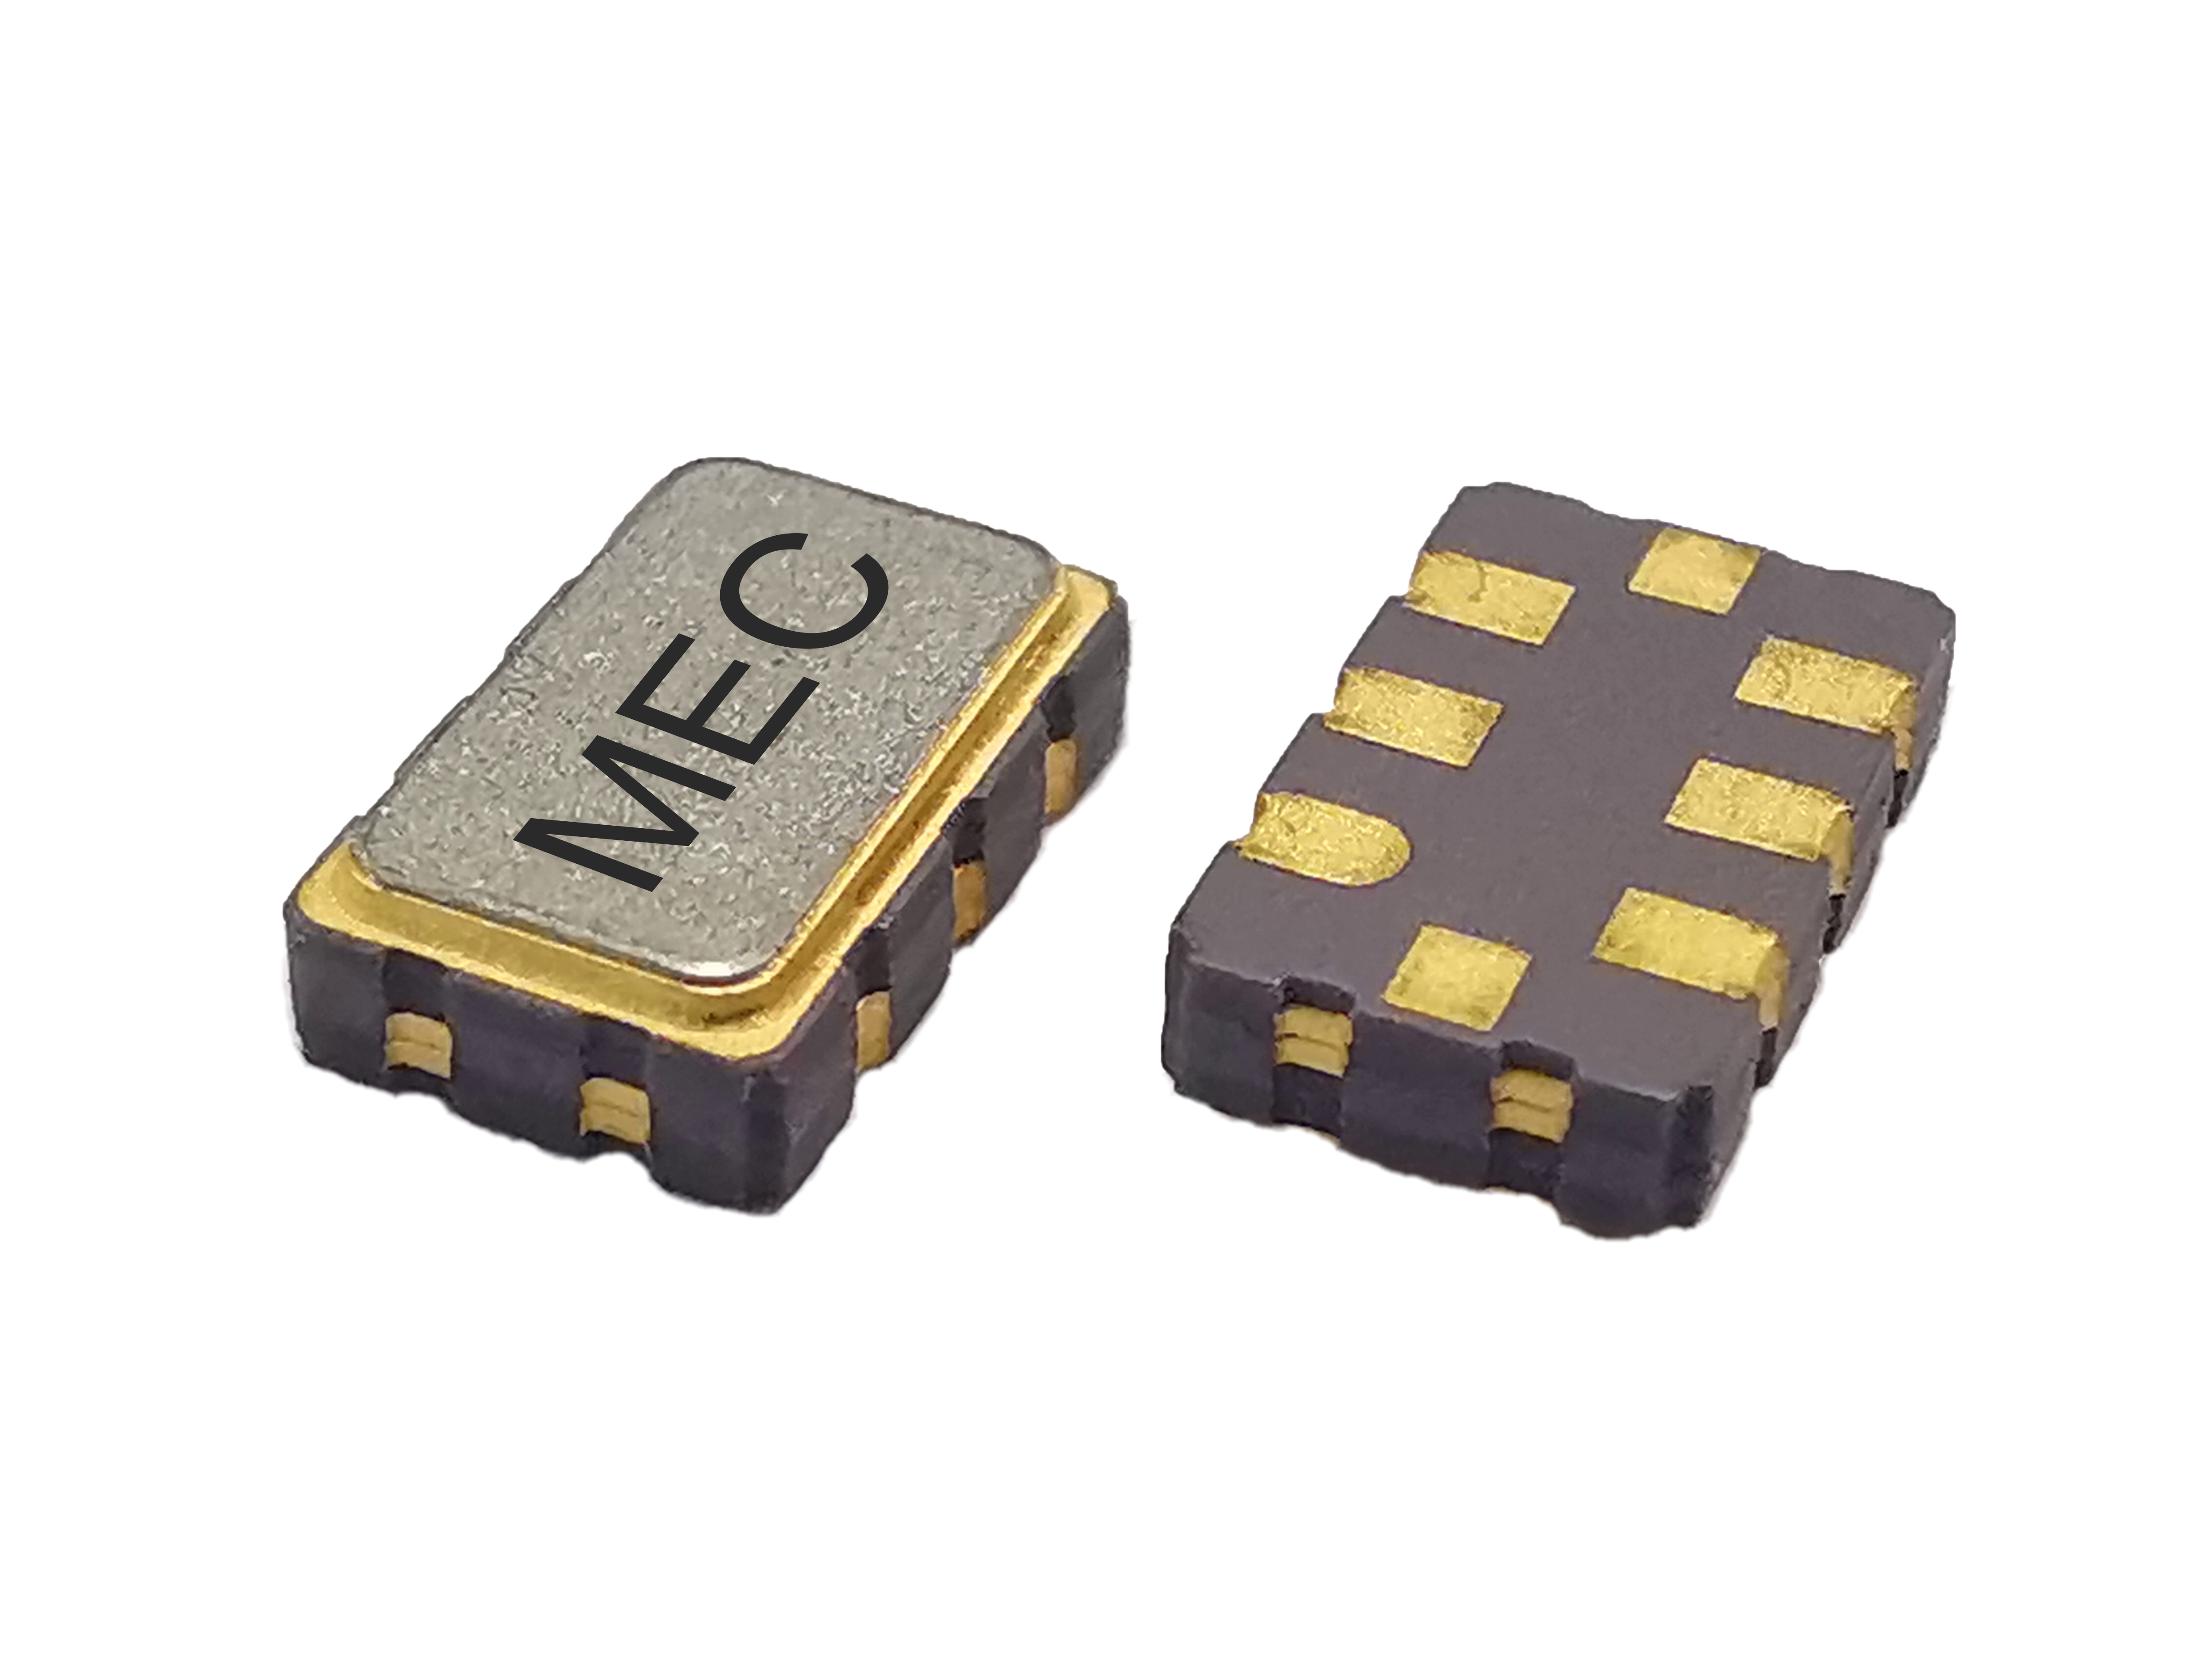 HPJF538 5032 2.5V Ultra Low Jitter Quick-turn Programmable Differential LVPECL SMD Crystal Oscillator